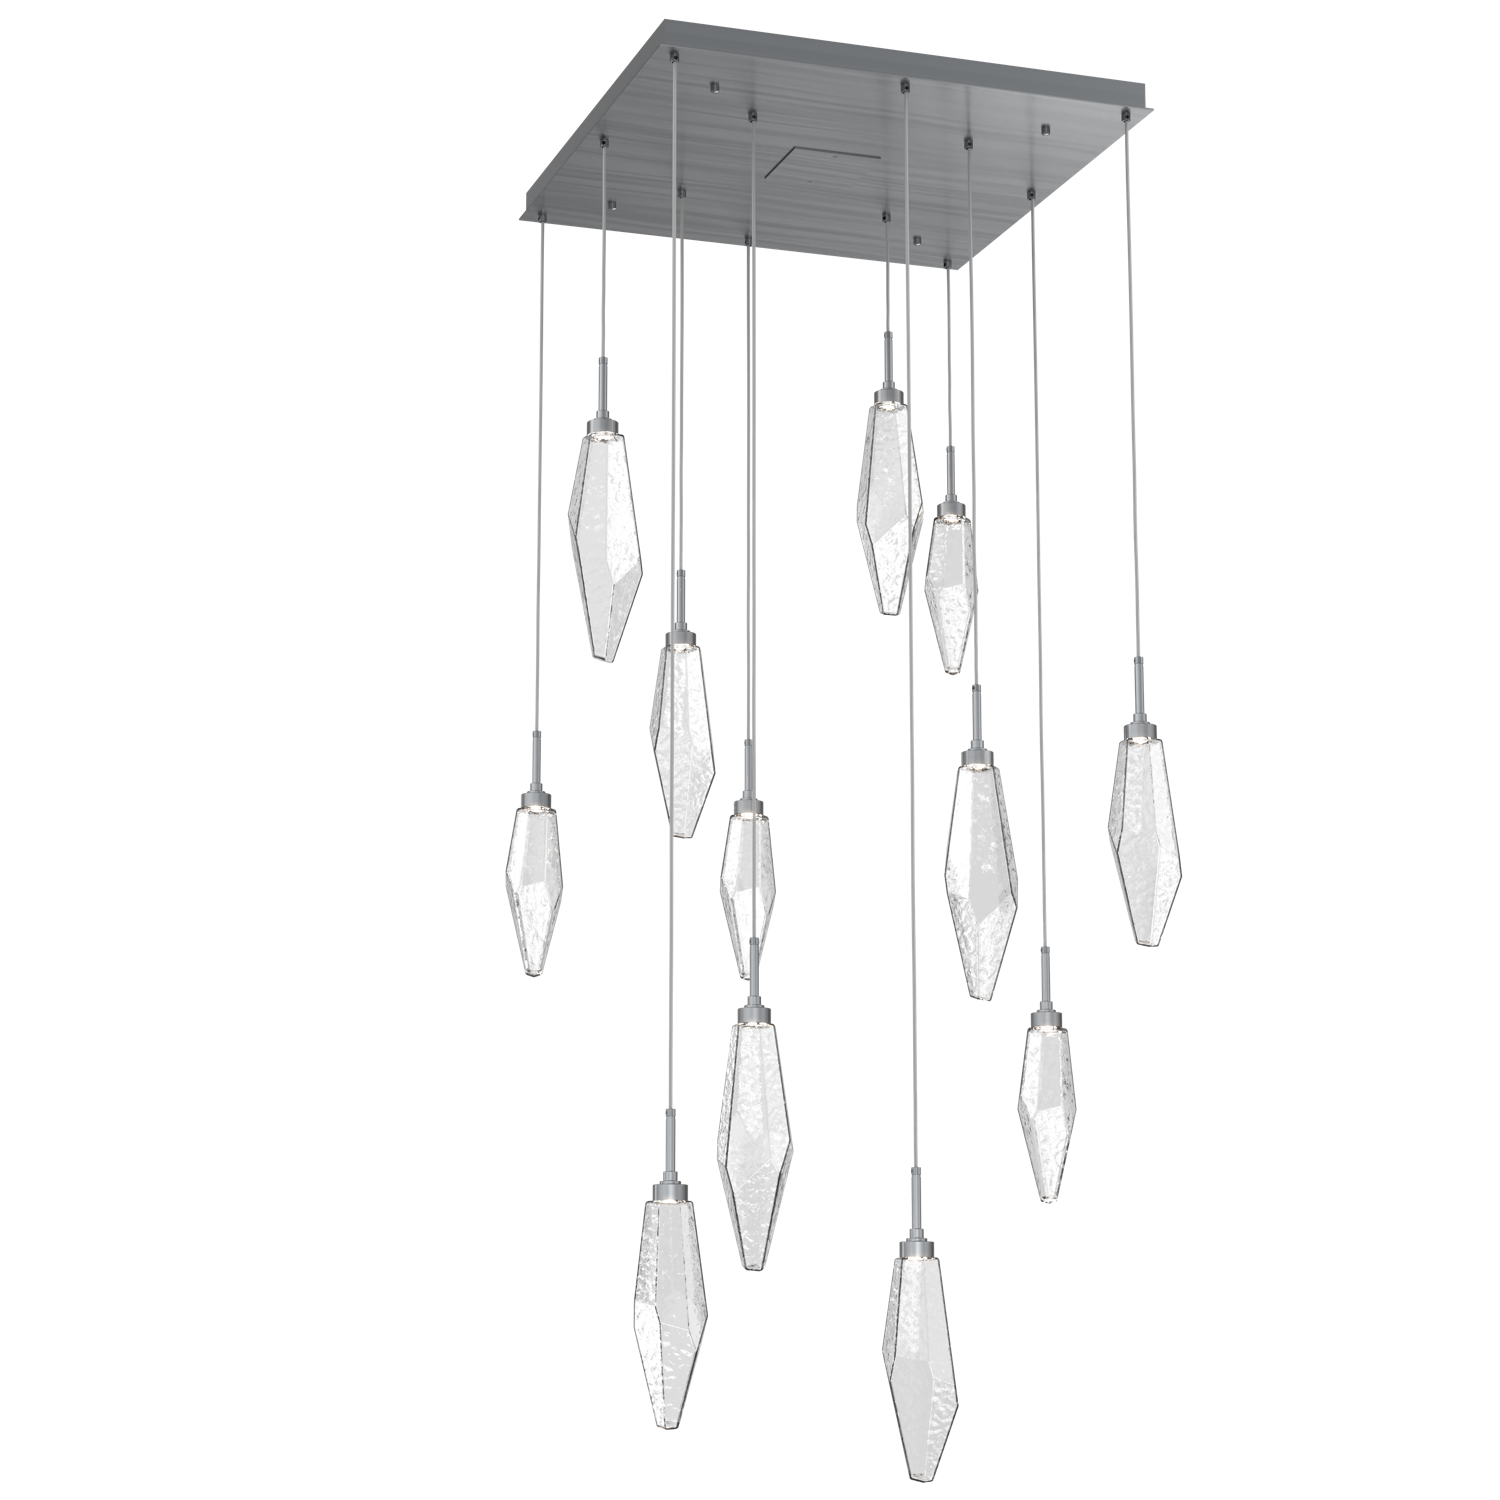 CHB0050-12-GM-CC-Hammerton-Studio-Rock-Crystal-12-light-square-pendant-chandelier-with-gunmetal-finish-and-clear-glass-shades-and-LED-lamping